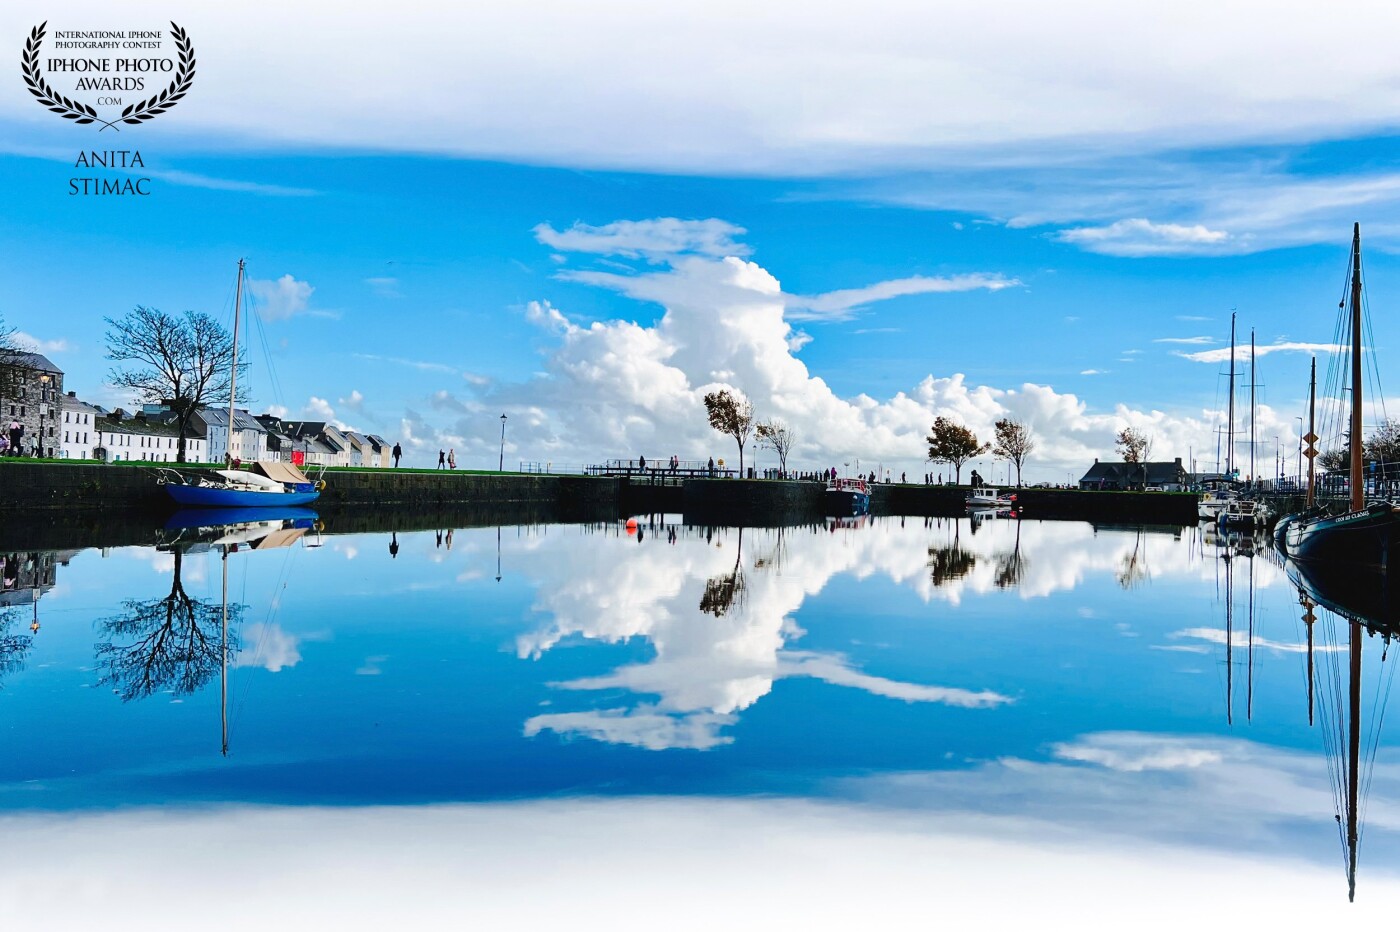 “How sweet to be a Cloud Floating in the Blue! Every little cloud Always sings aloud.”<br />
<br />
Cloud Reflection at Claddagh Basin, Galway City, Ireland.